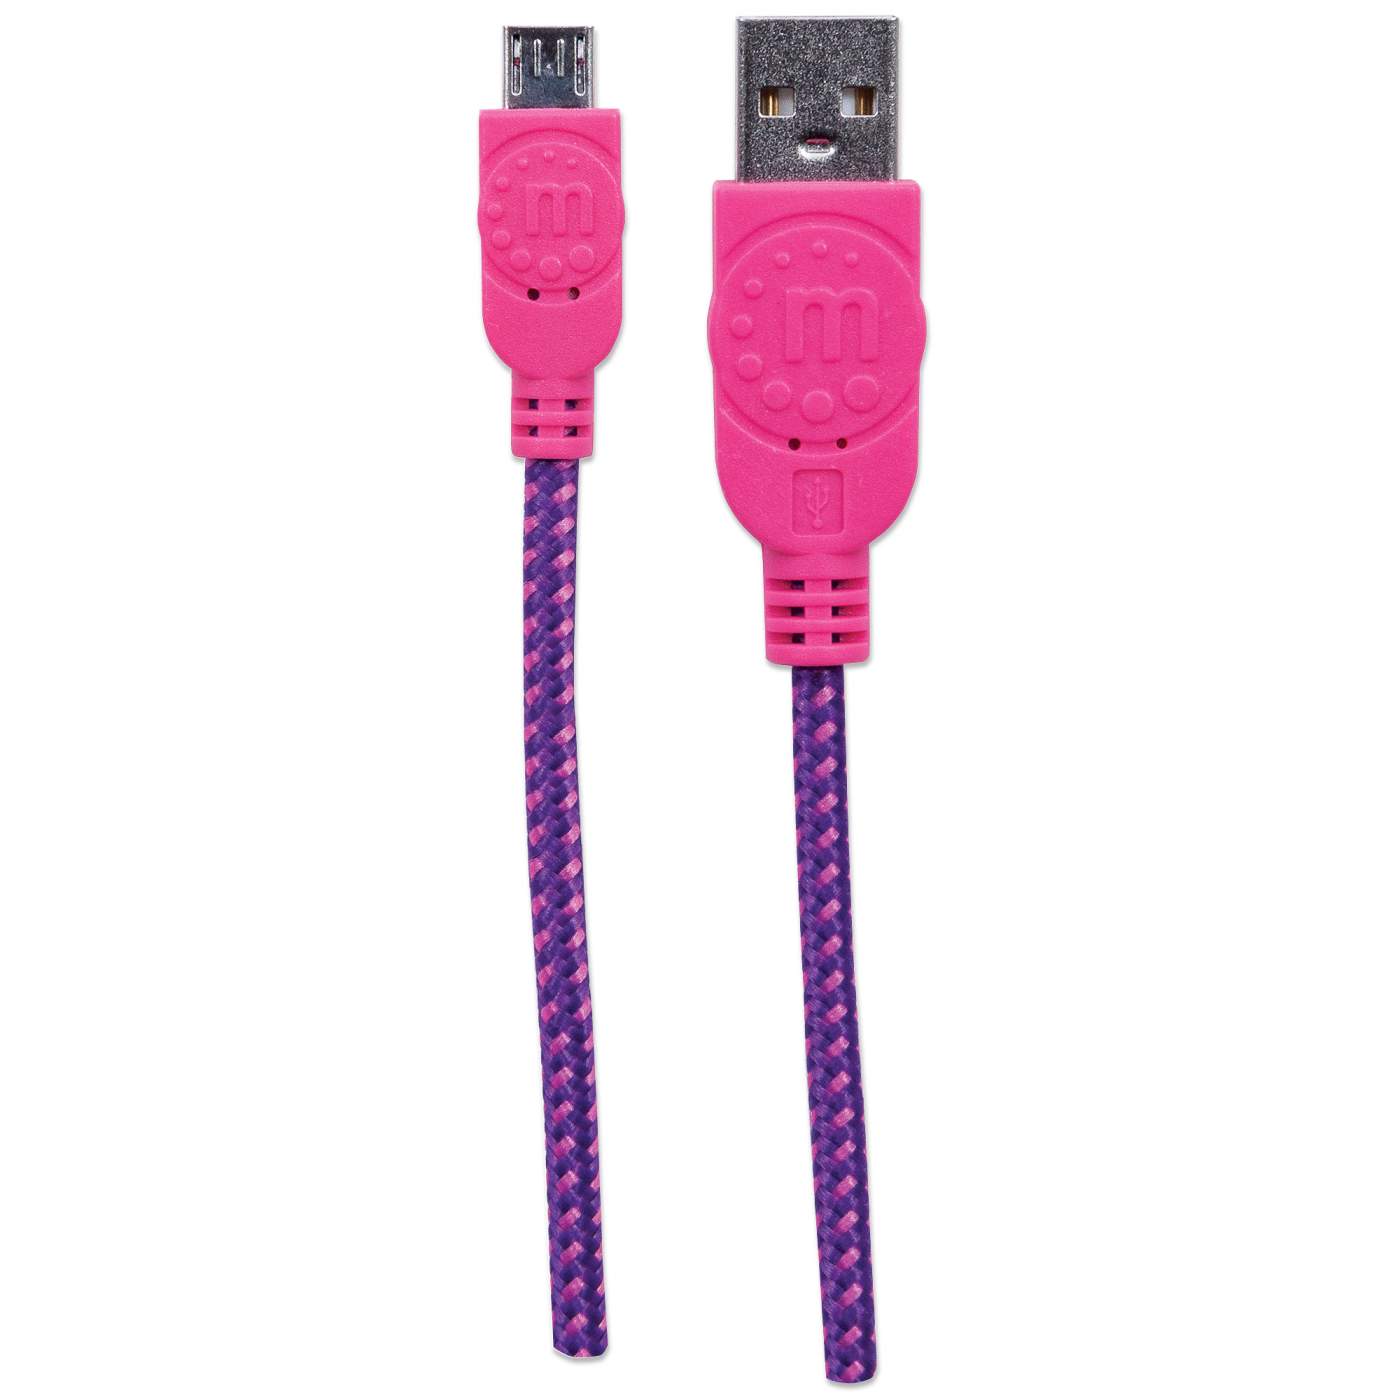 Braided Hi-Speed USB Micro-B Device Cable Image 5